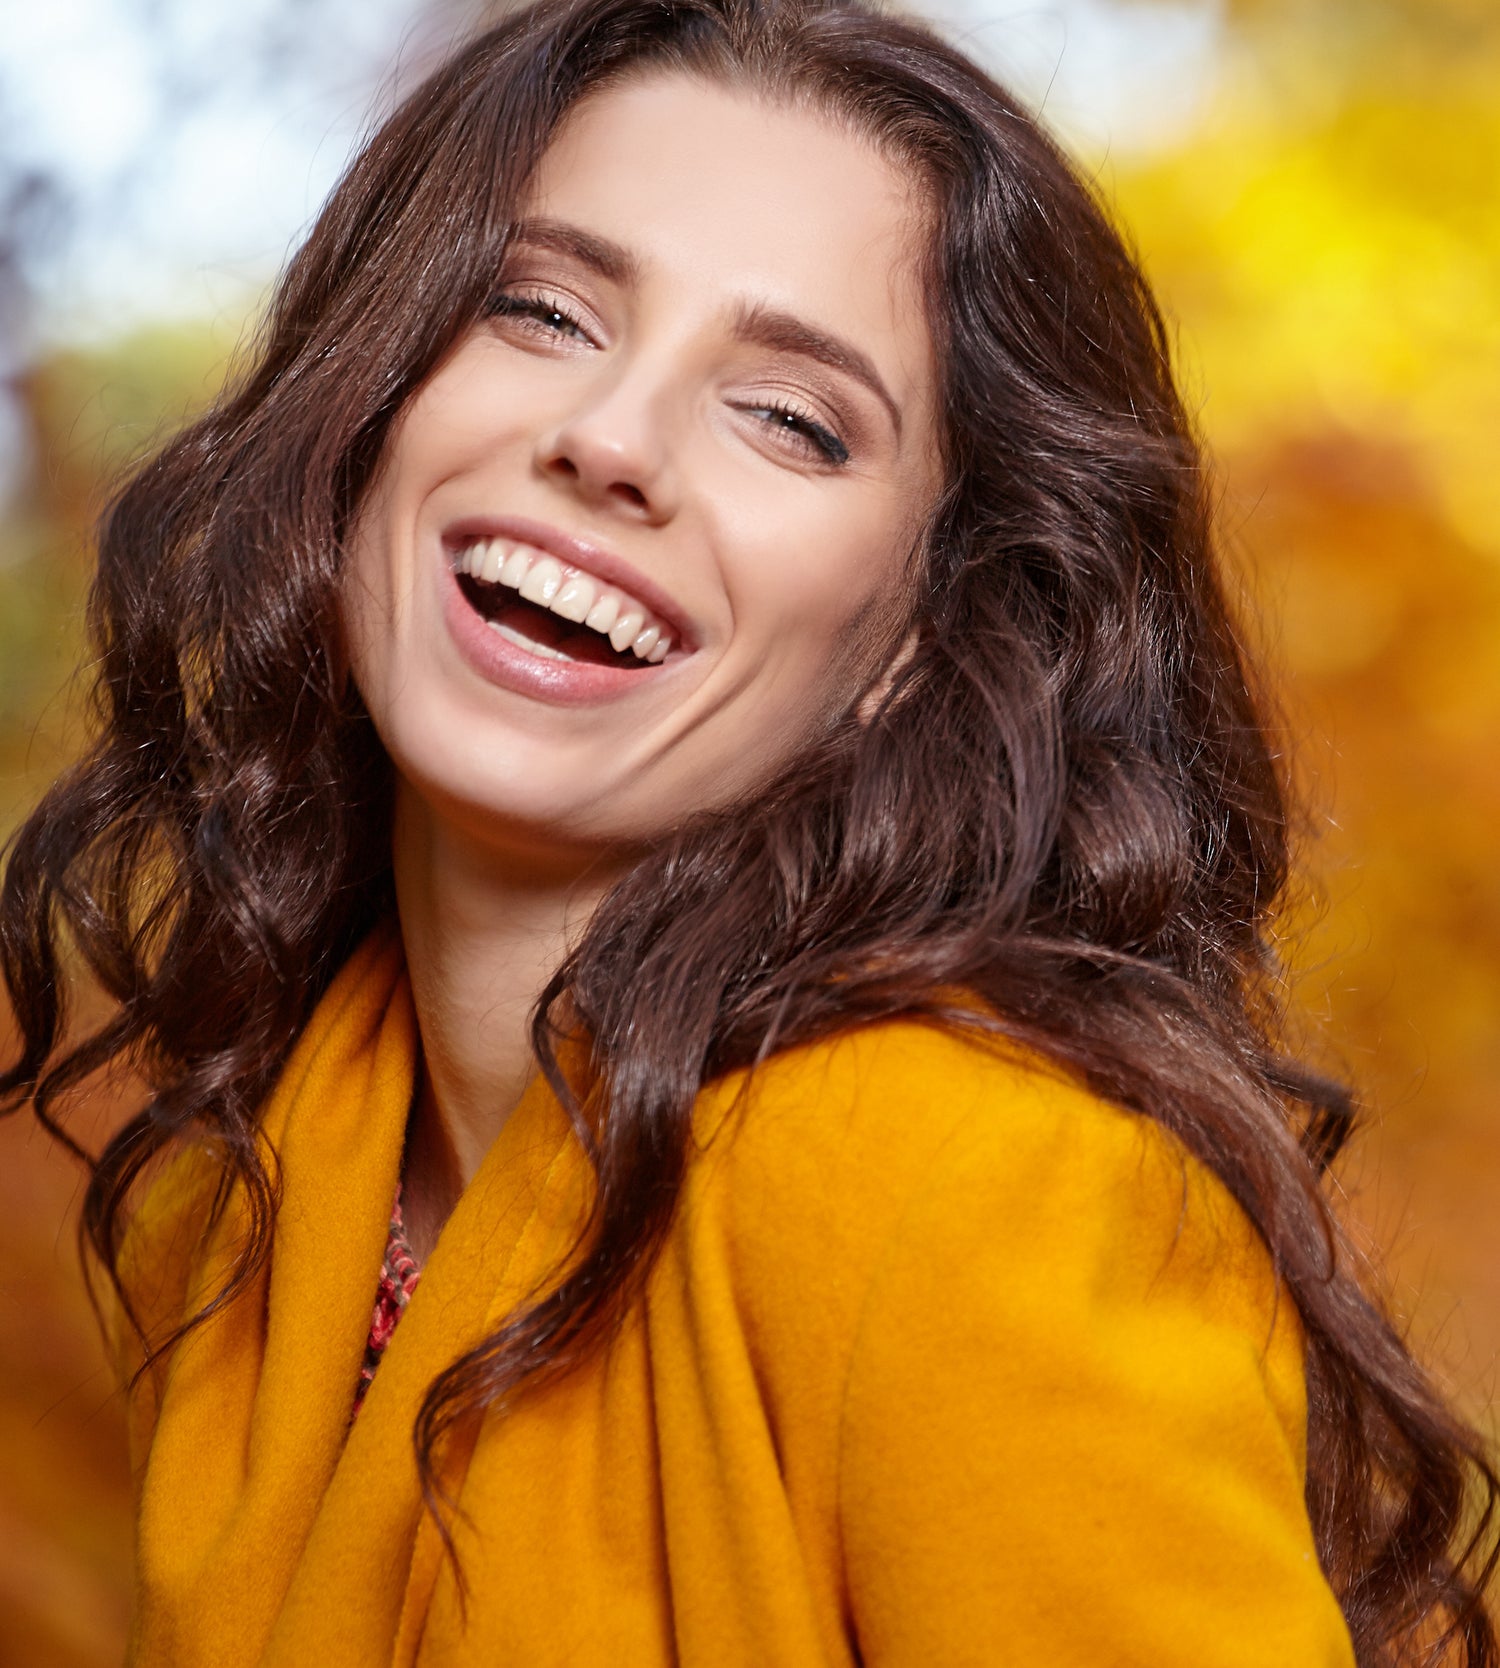 woman with long hair happy and smiling because of enclare hormonal imbalance products.